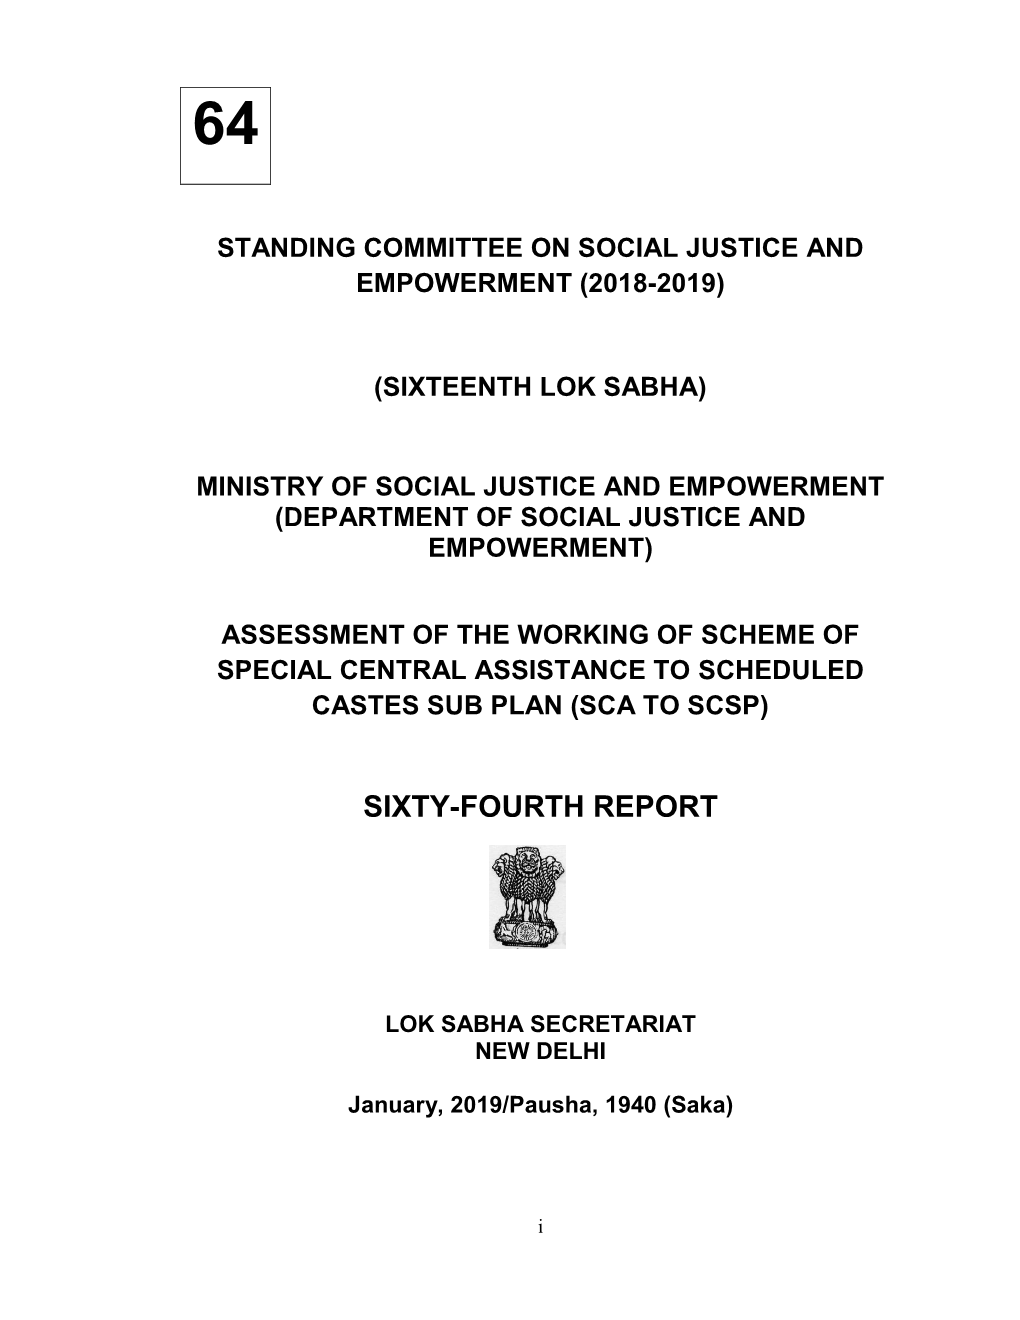 Standing Committee on Social Justice and Empowerment (2018-2019)